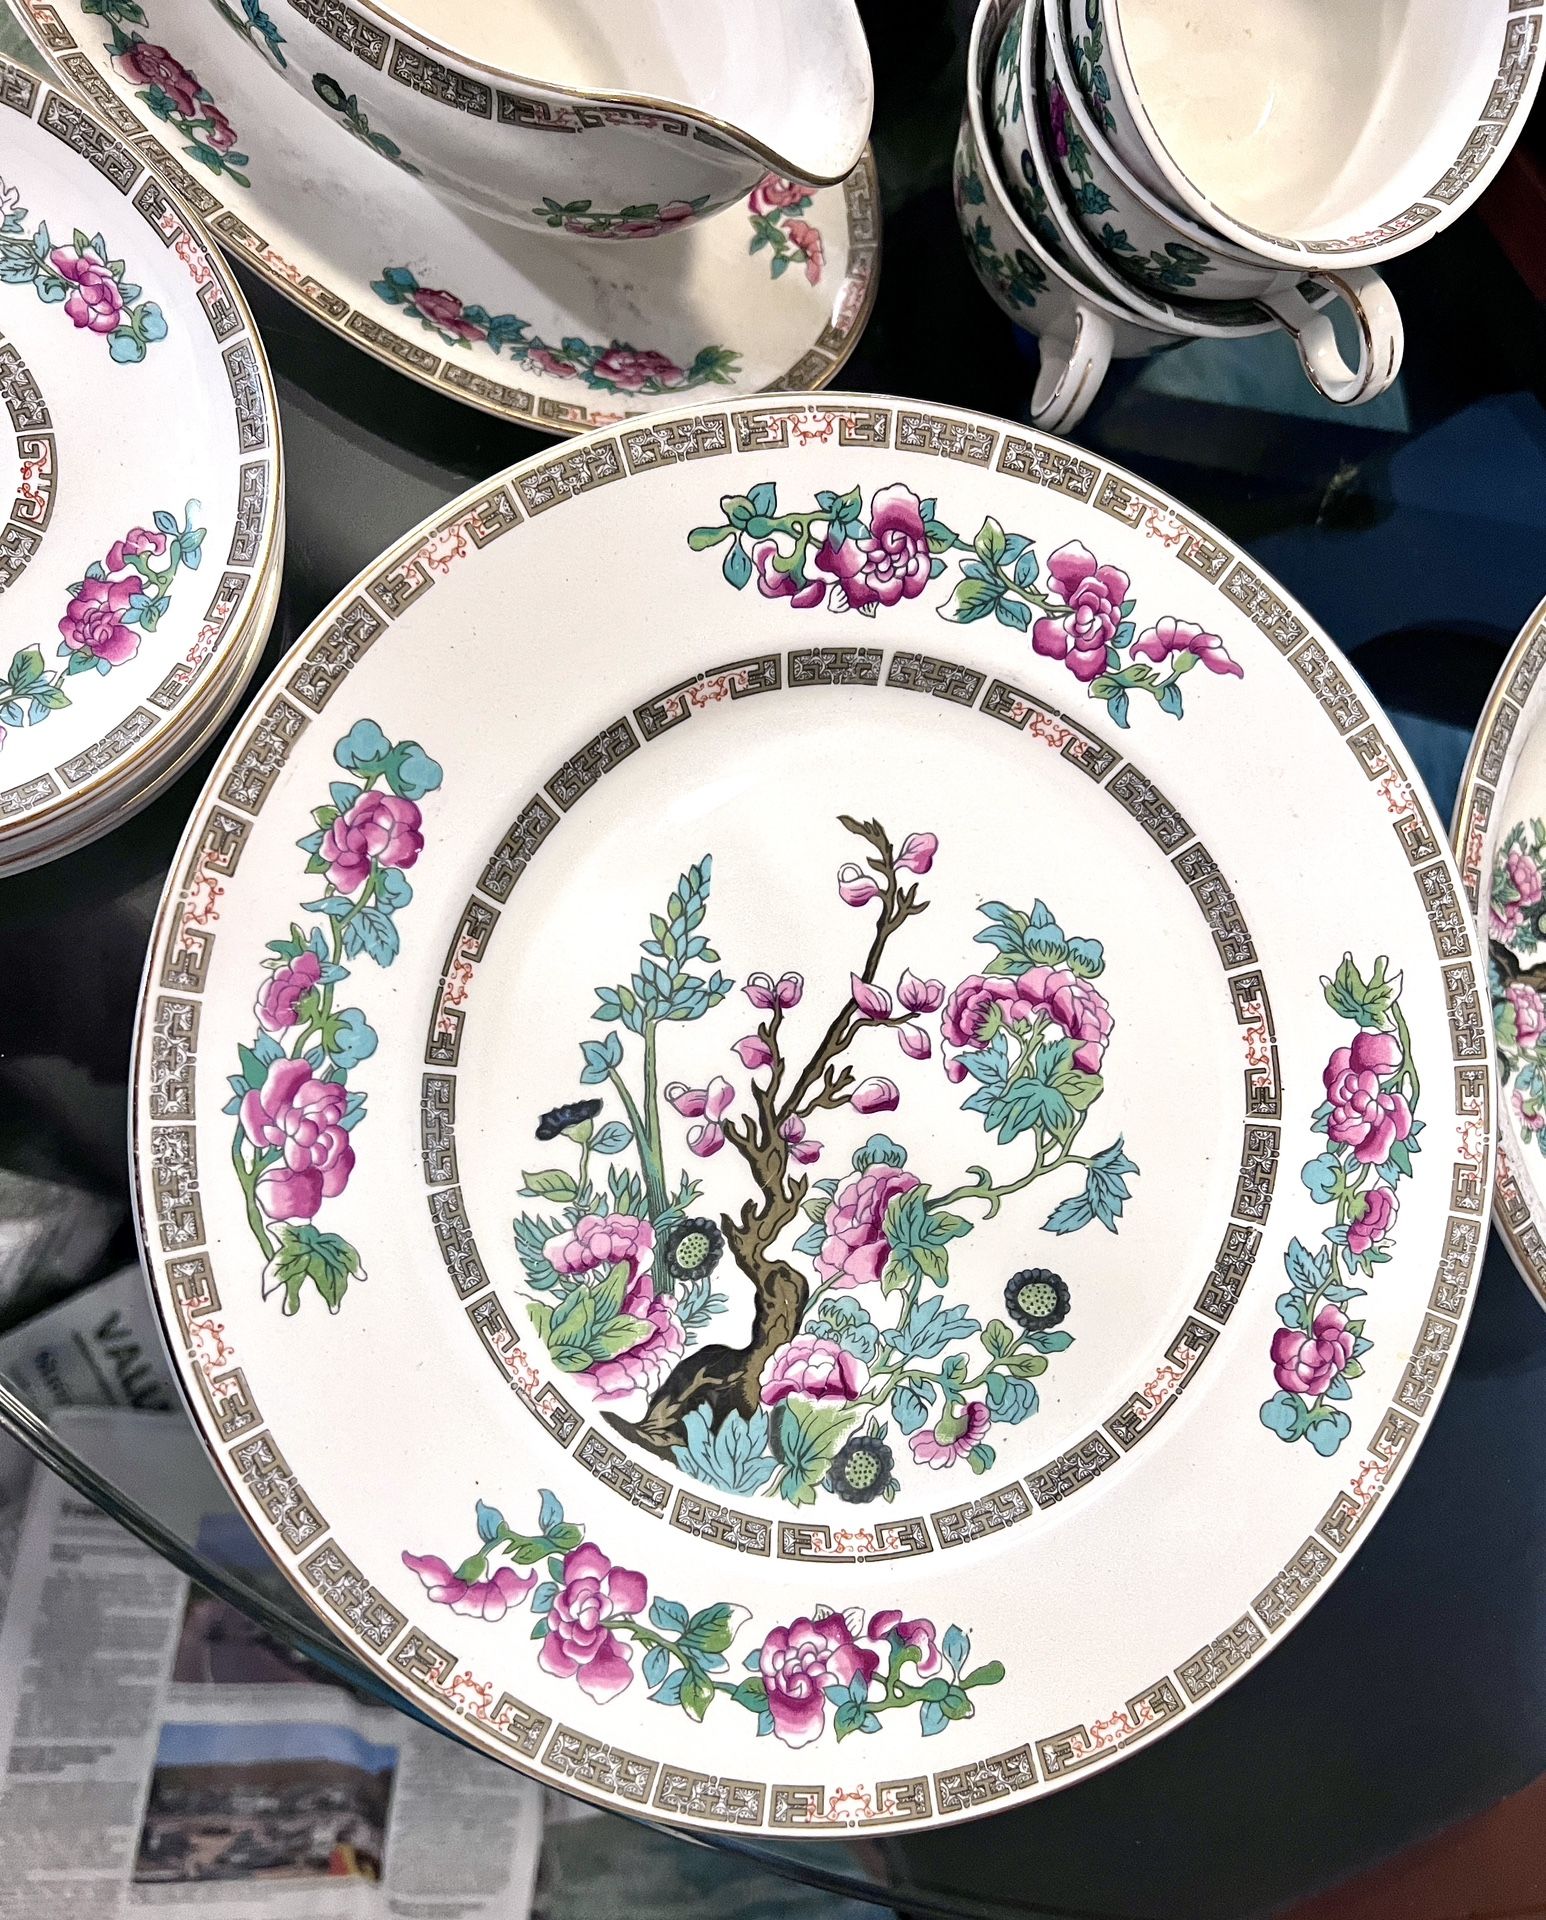 Maddock & Sons England China Dishes “Indian Tree” Set Vintage 